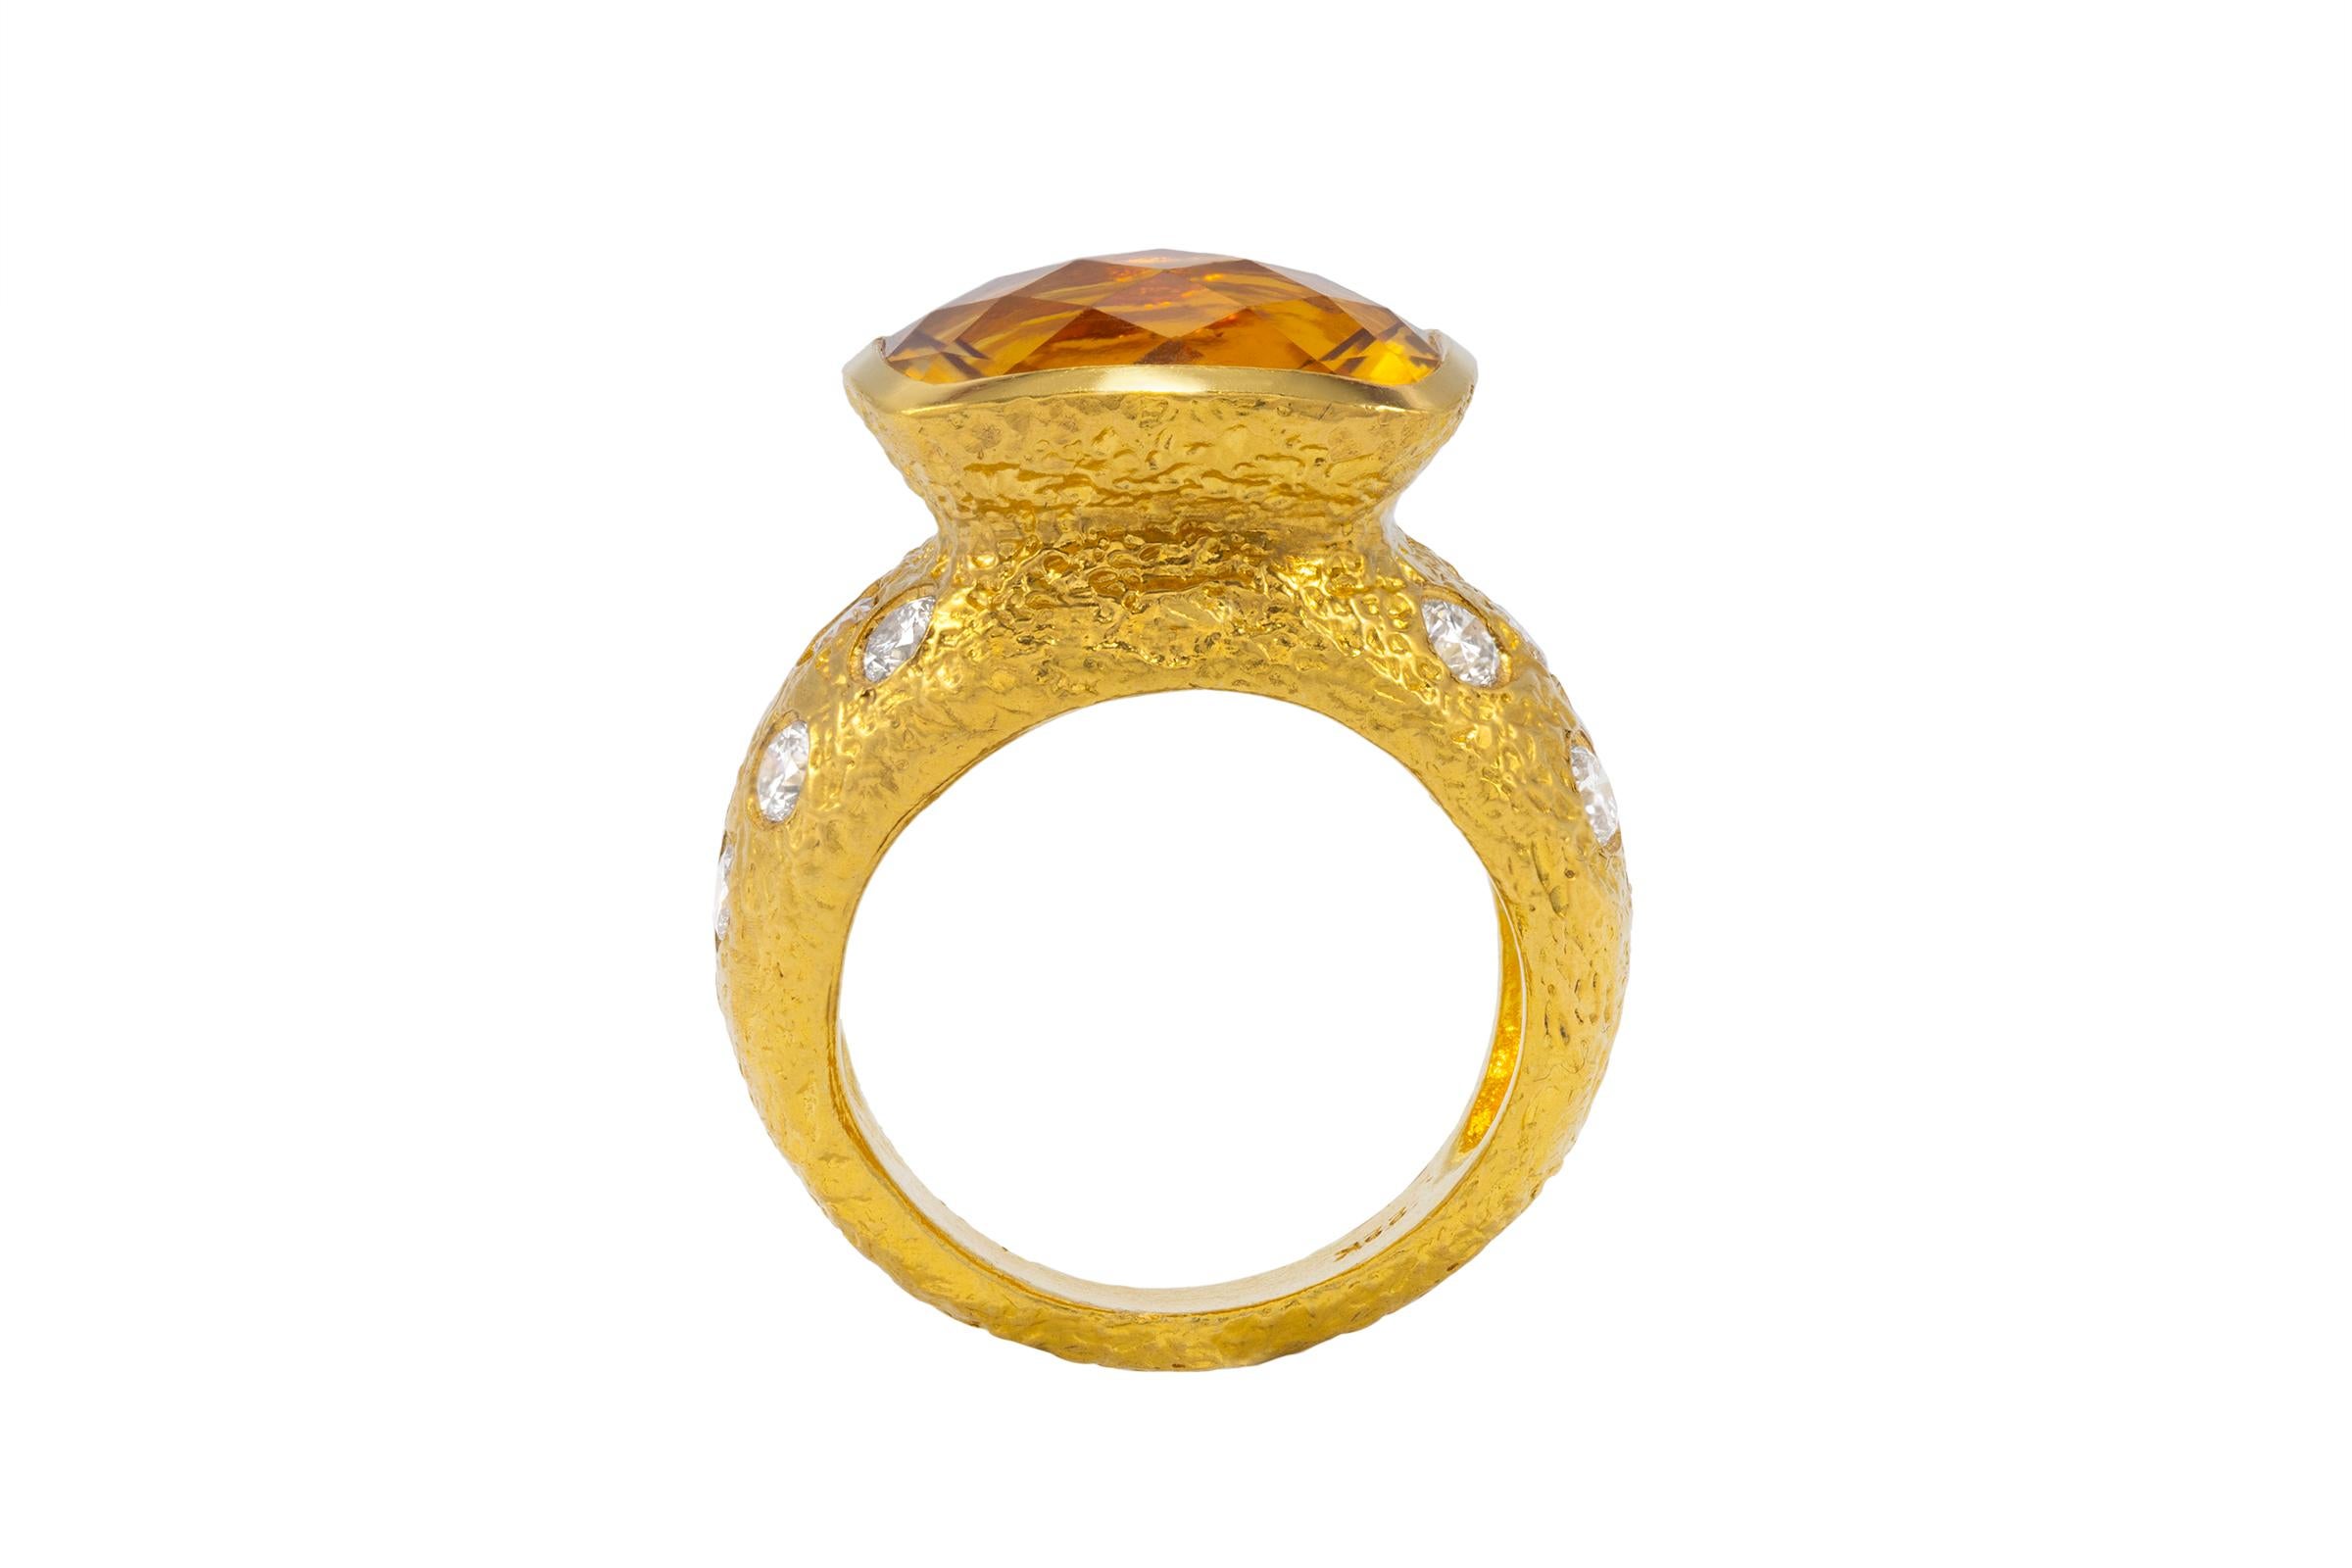 Artisan 22k Gold Citrine Birthstone Cocktail Ring with Diamonds, by Tagili For Sale